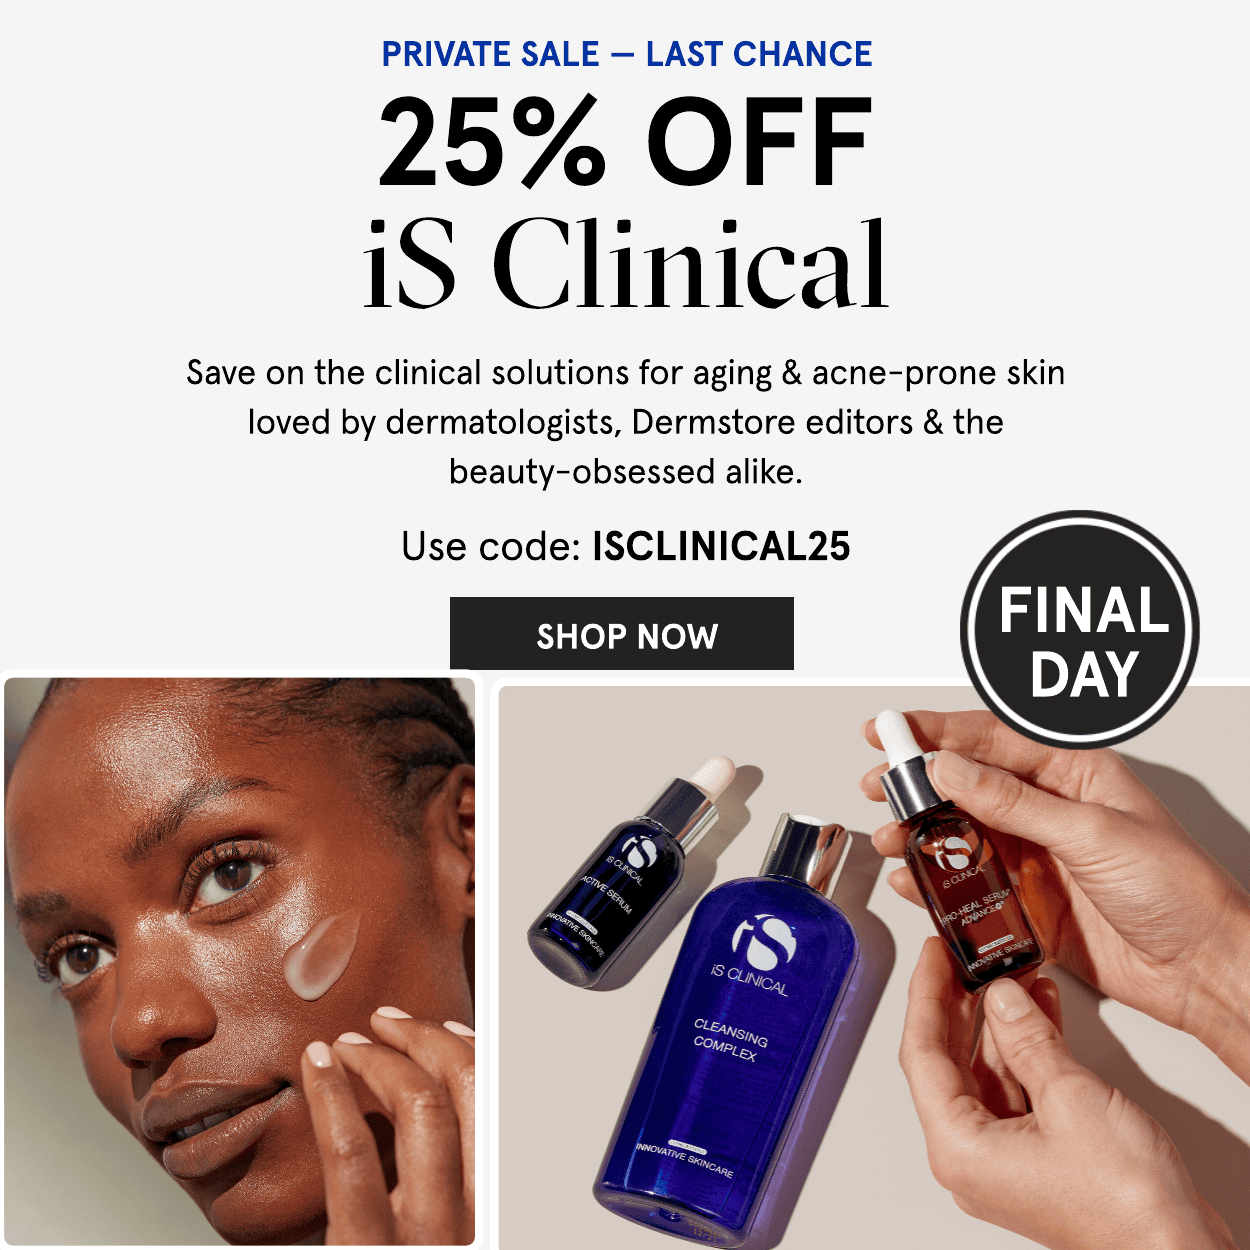 Sale 25% OFF on iS Clinical Use Code: ISCLINICAL25